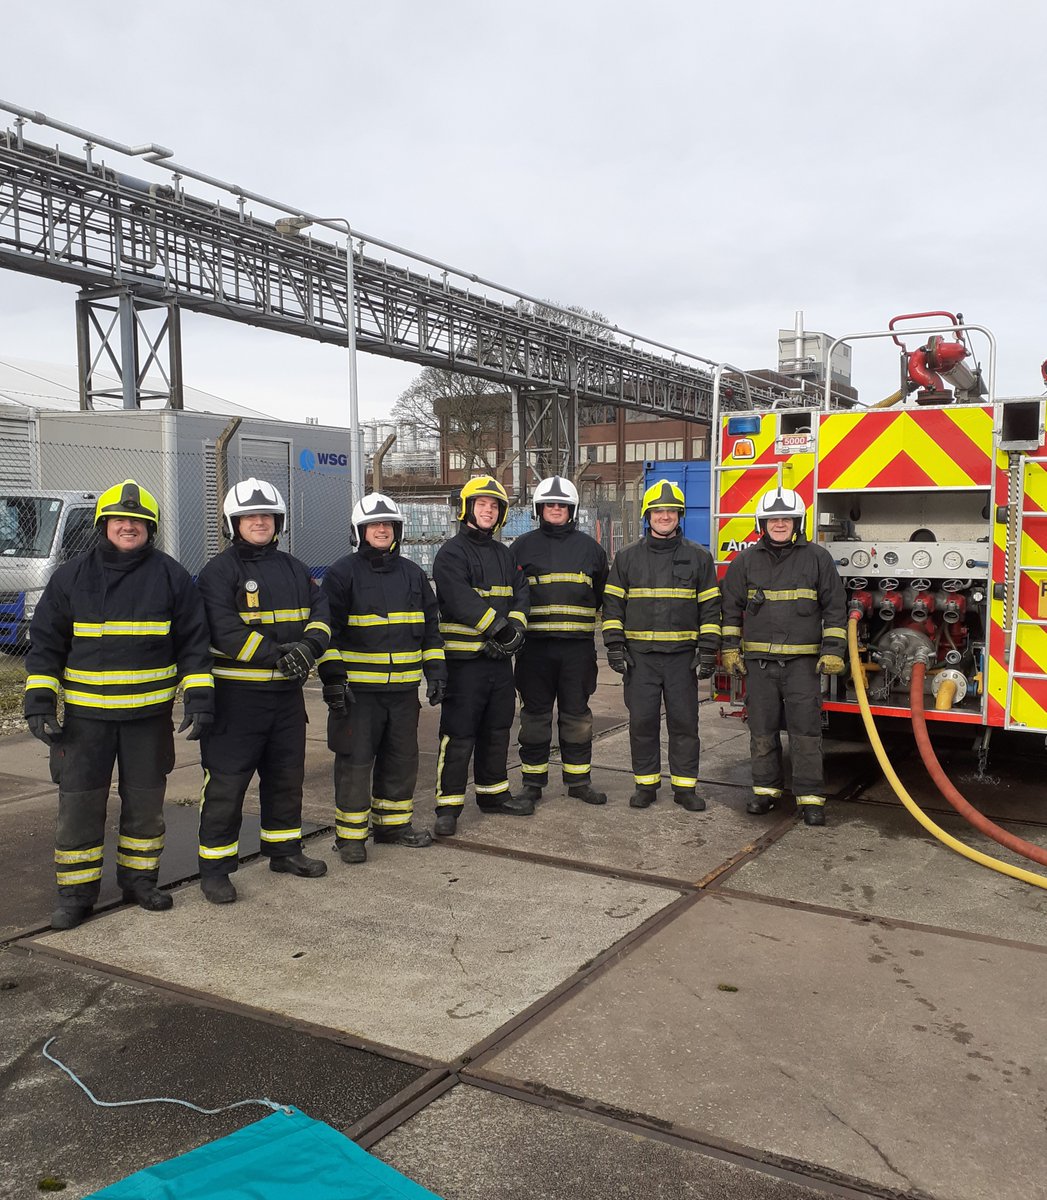 This is what happiness looks like. Our Training Assessor has conducted HAZMAT and Decontamination training at a Top Tier COMAH site in West Yorkshire. If you wish to bring happiness to your employees working life, then introduce them to our insightful training courses. #HAZMAT